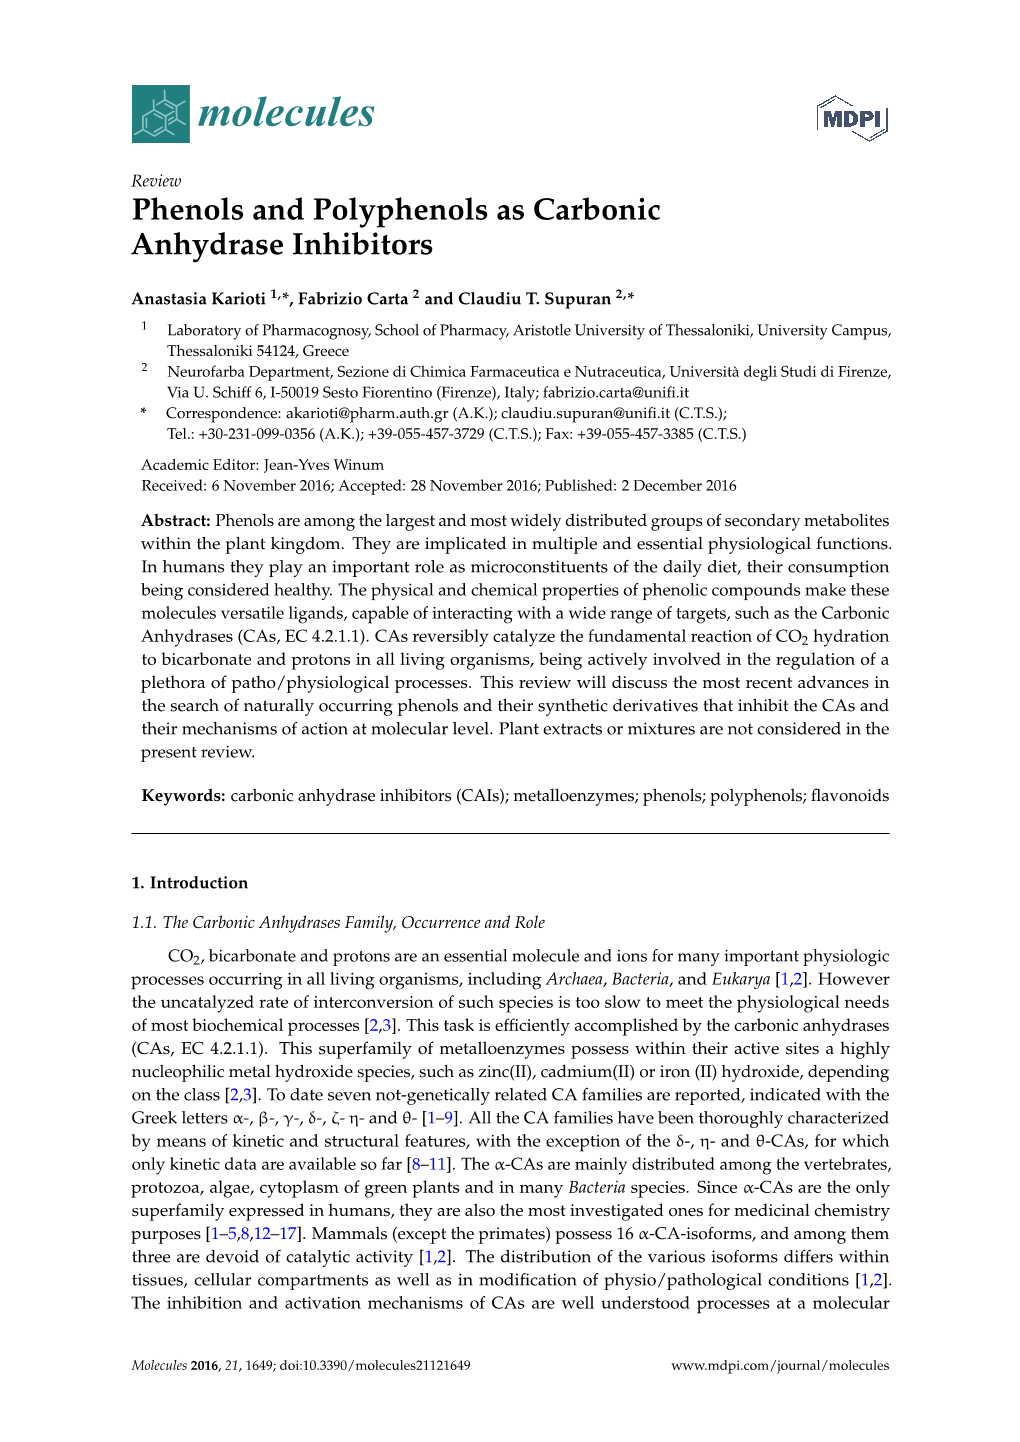 Phenols and Polyphenols As Carbonic Anhydrase Inhibitors